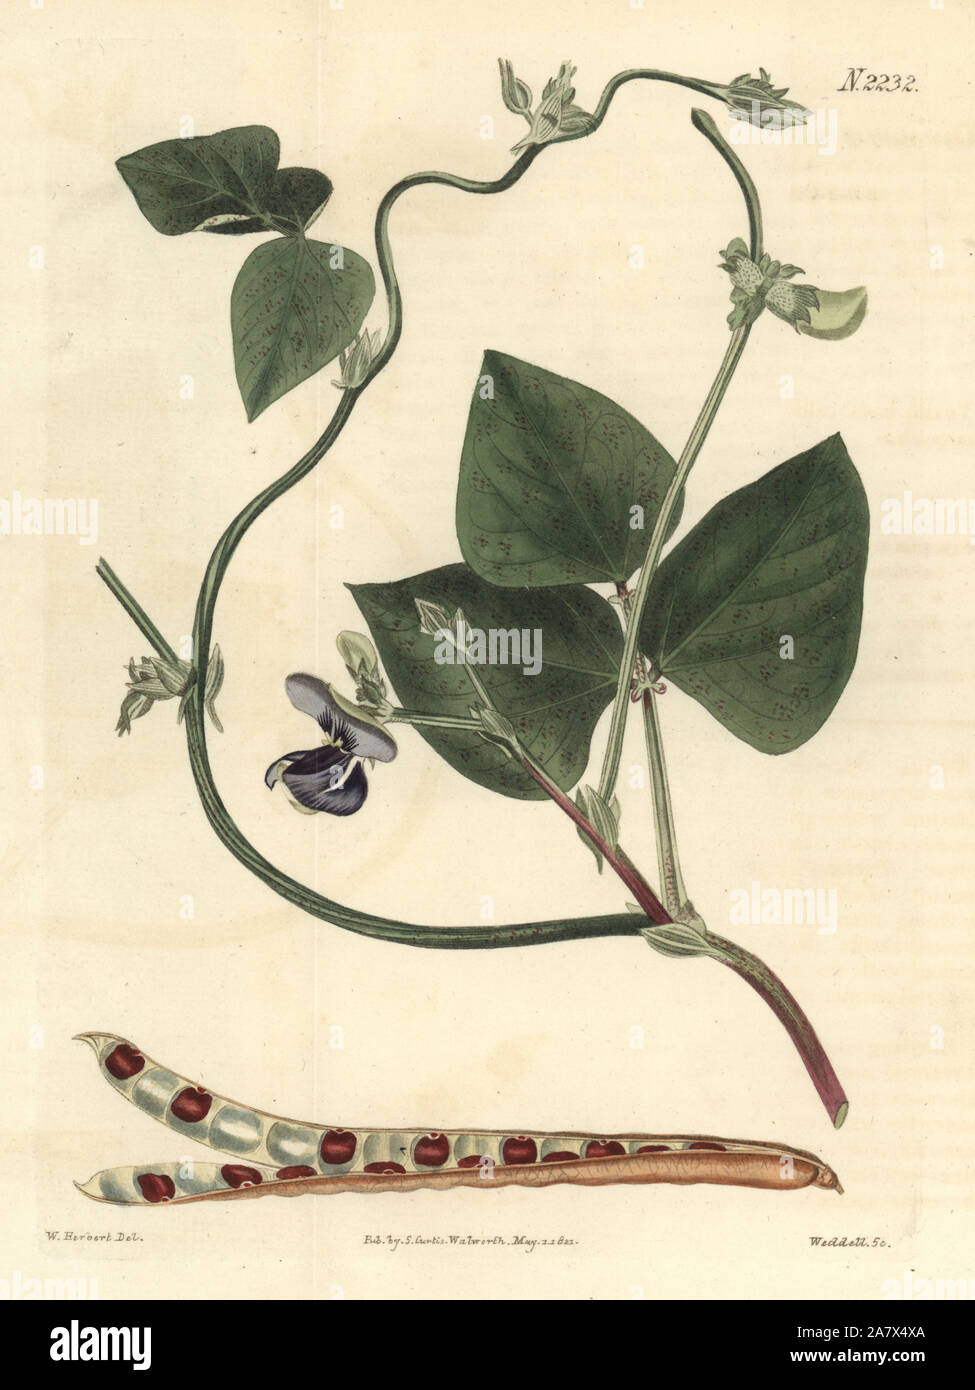 Cowpea, Vigna unguiculata (Chinese dolichos, Dolichos sinensis). Handcoloured copperplate engraving by Weddell after a drawing by William Herbert for Samuel Curtis' continuation of William Curtis' Botanical Magazine, London, 1822. Stock Photo